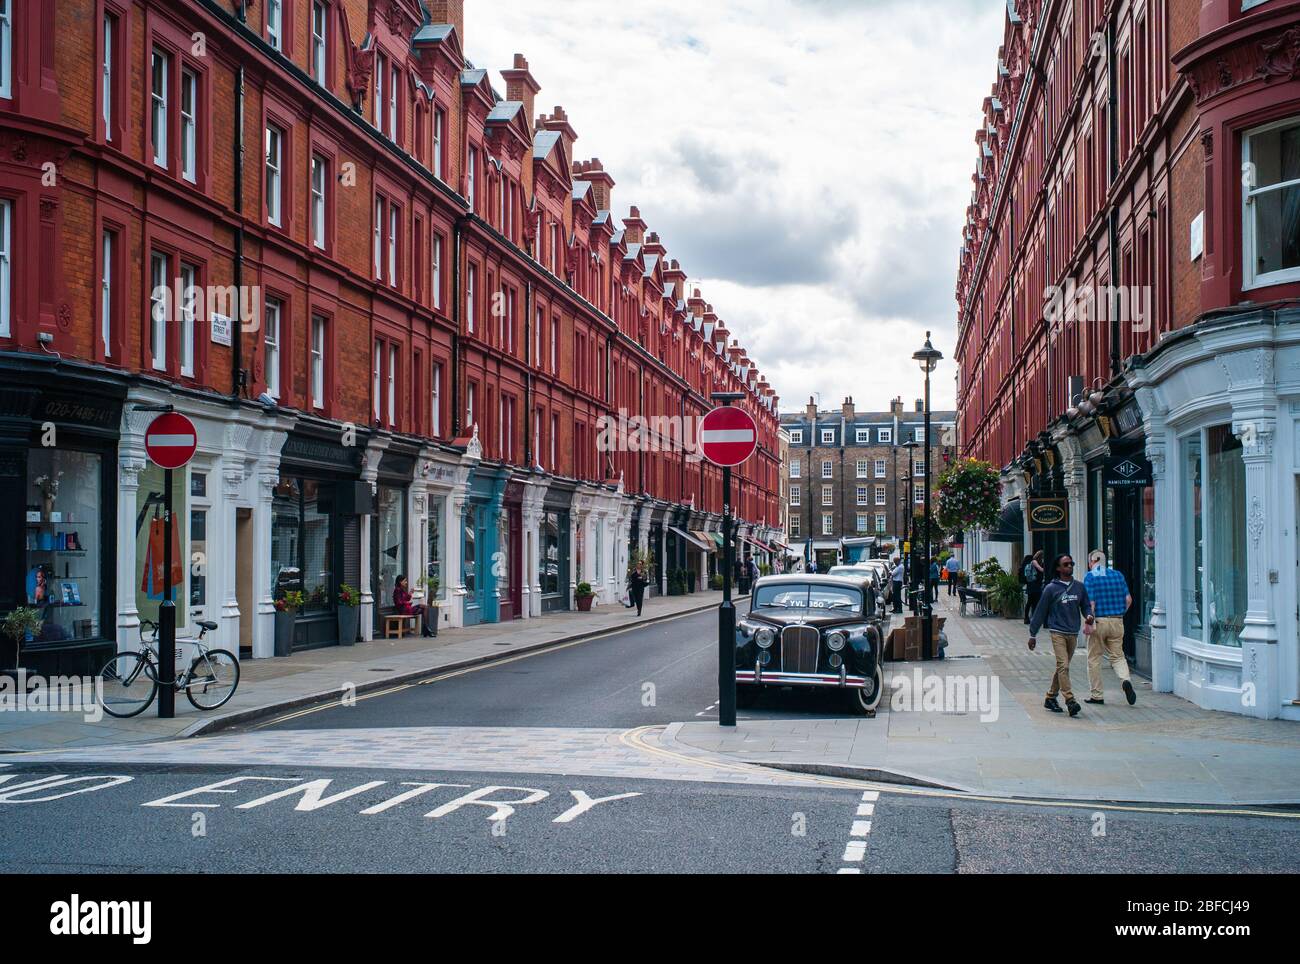 London, England, United Kingdom, May 24 2016: Chiltern Street with Rows of Shops in Old Red Brick Buildings. A Shopping Street in Marylebone, London, Stock Photo